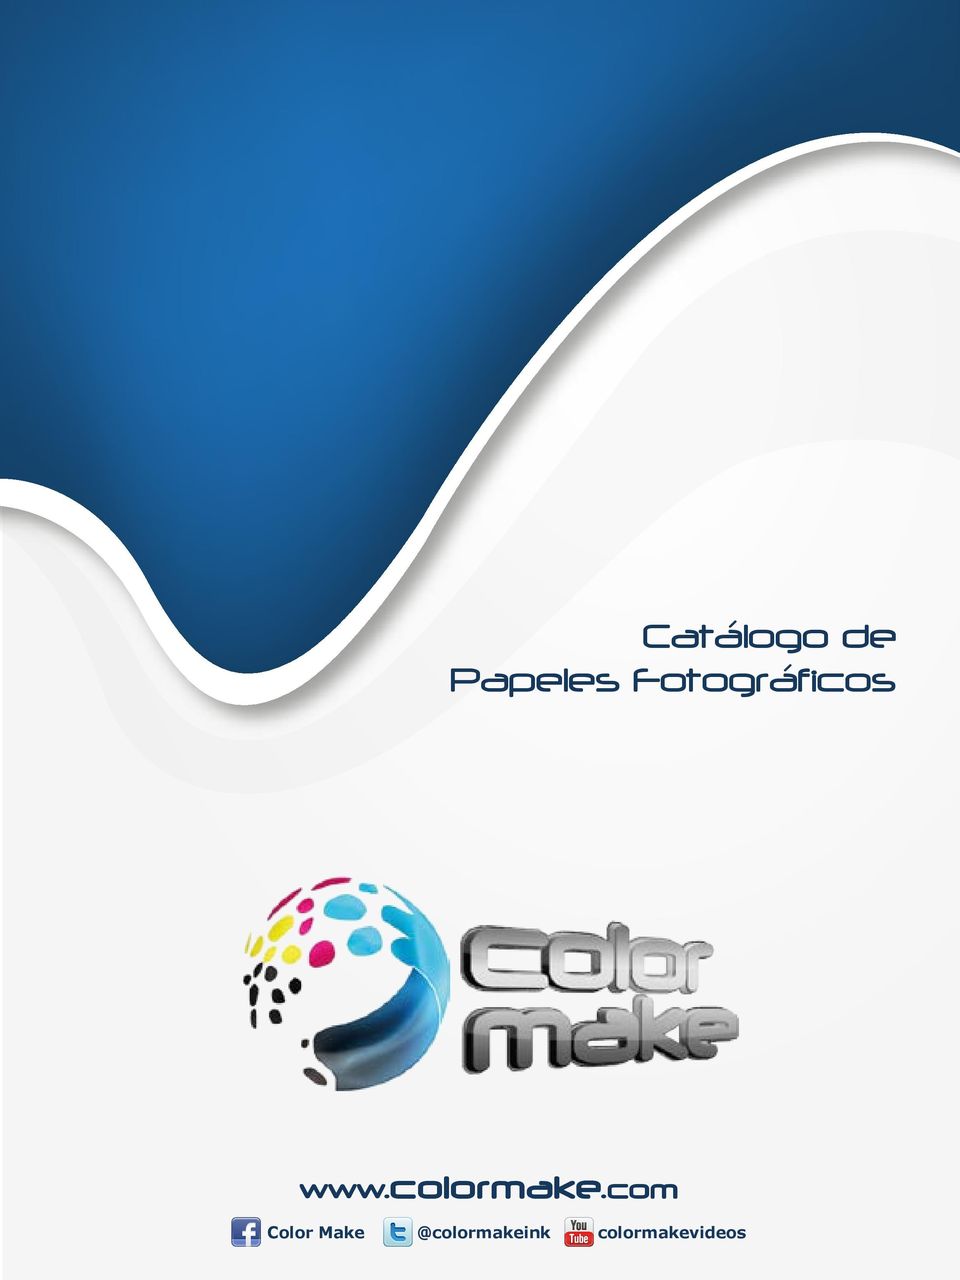 colormake.